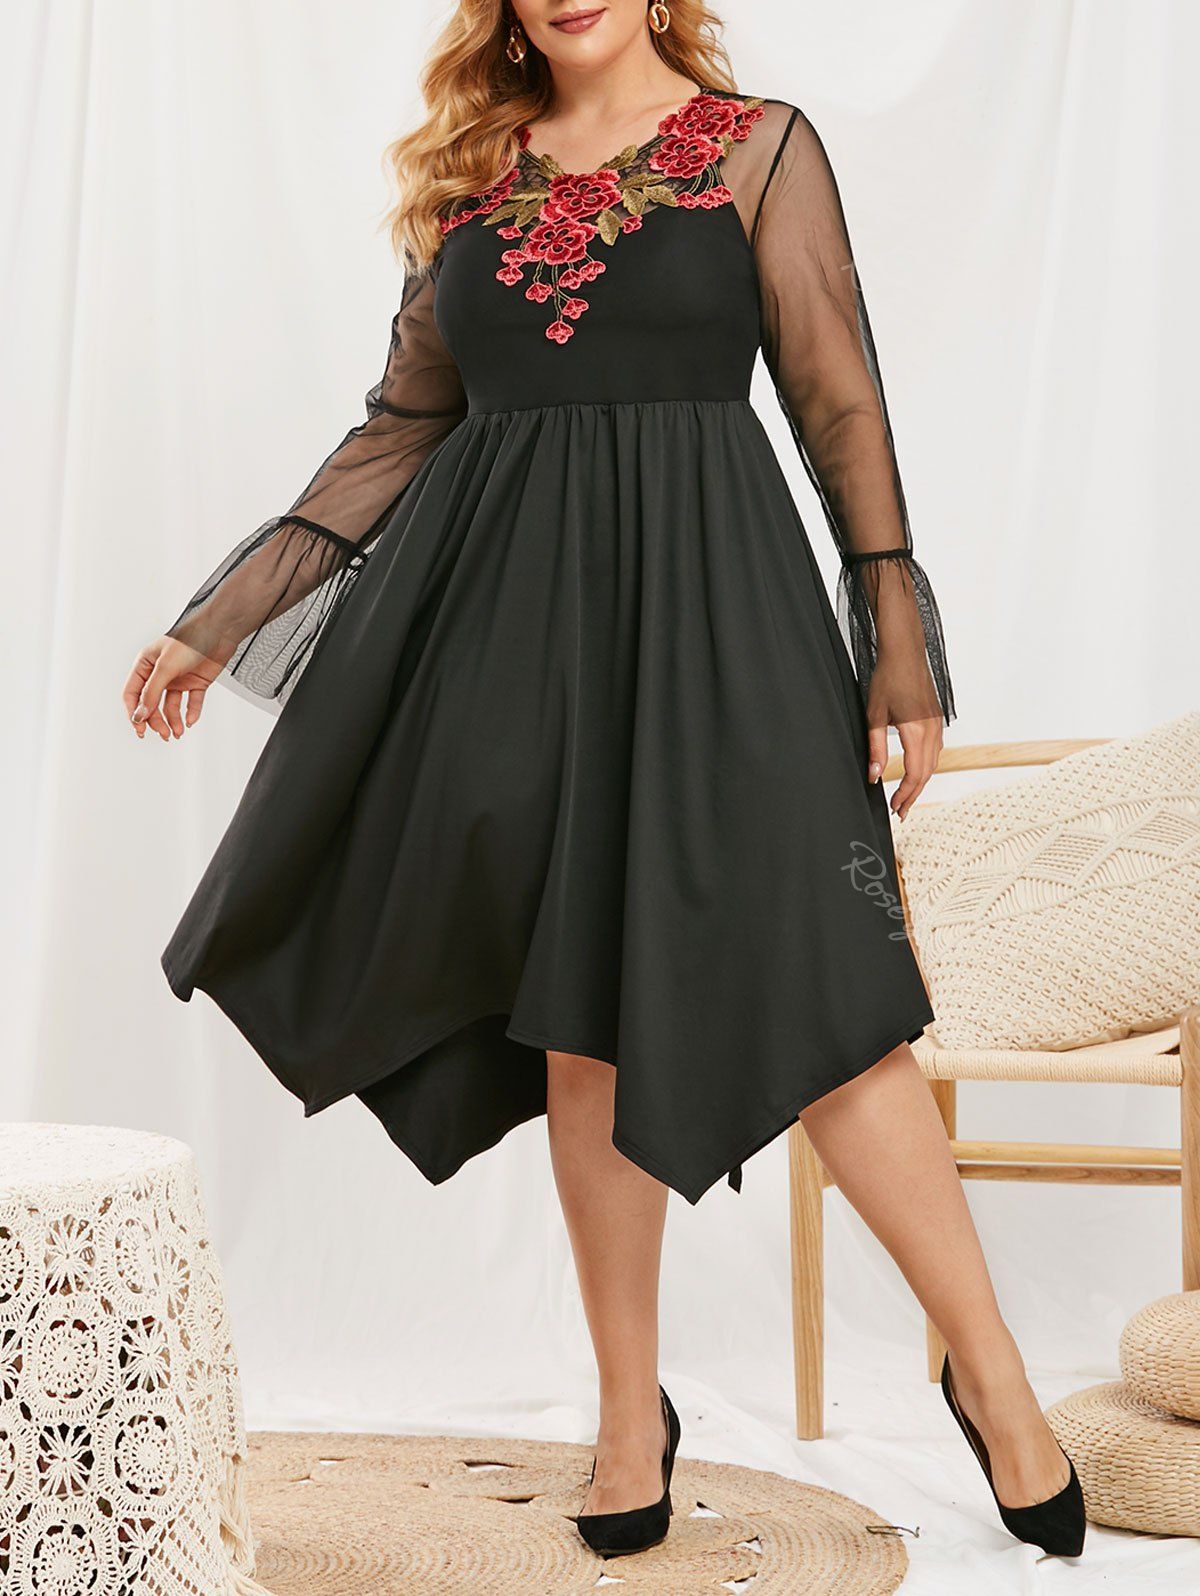 Rosegal Plus Size Flower Applique Lace Flare Sleeve Dress with Camisole